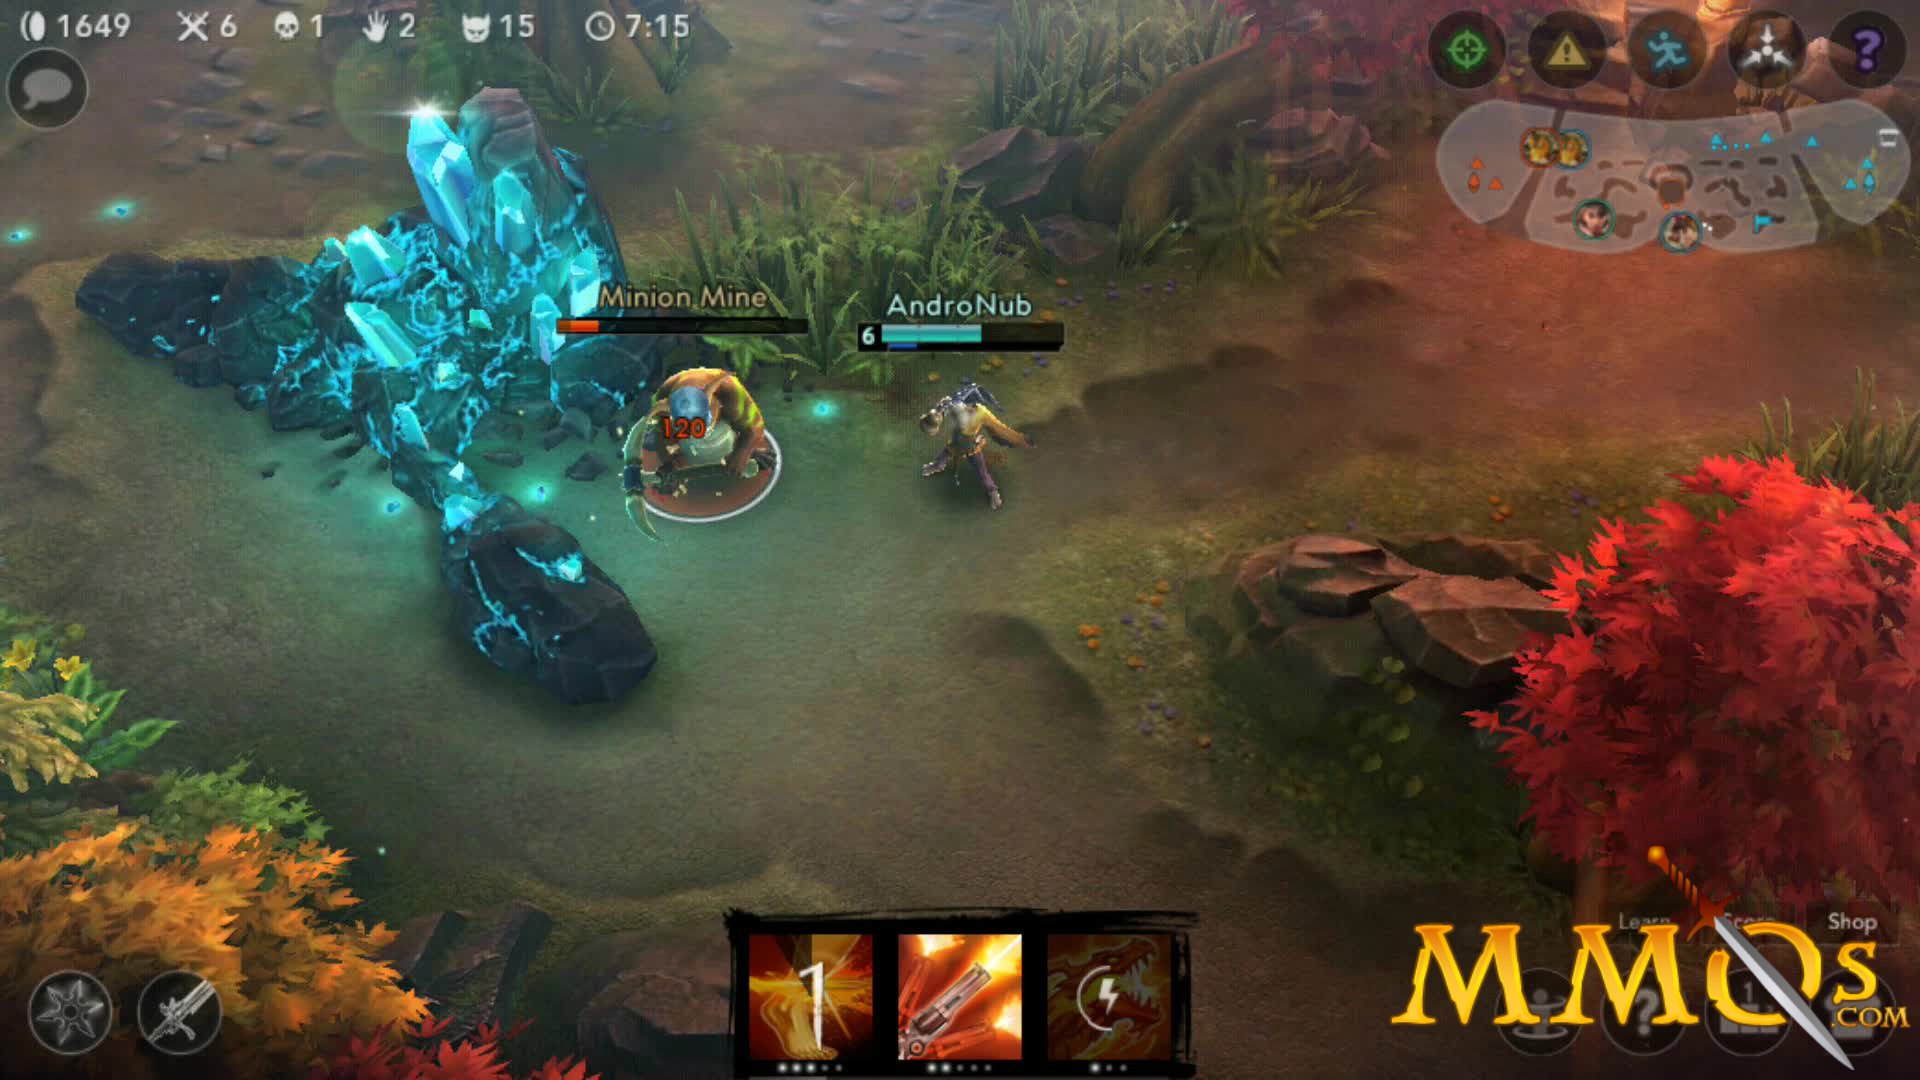 Vainglory Game - Where are Leaderboards? They're still